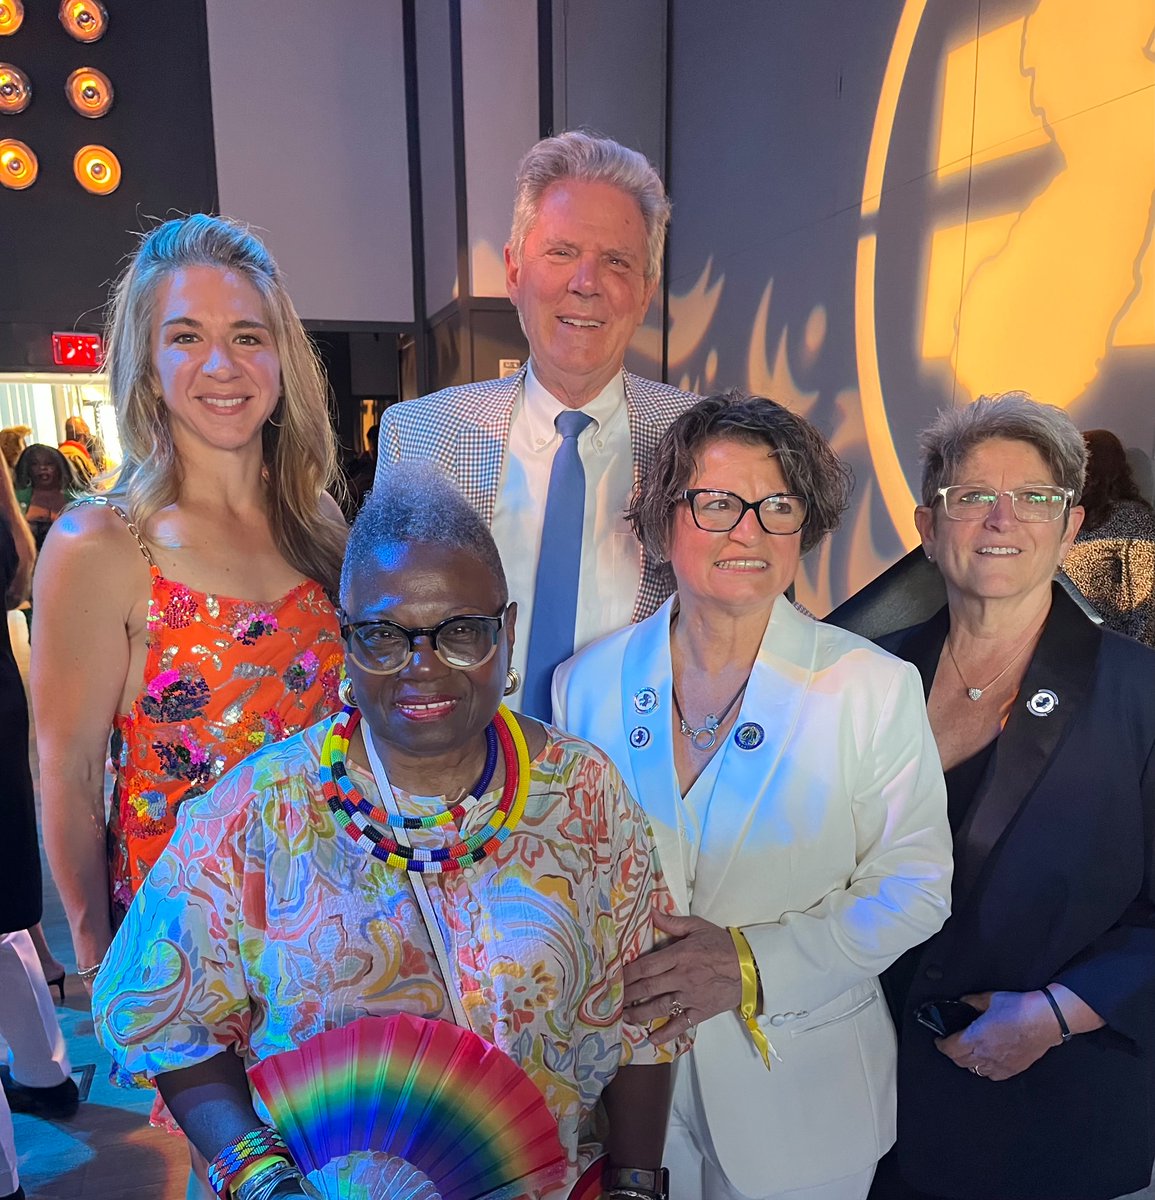 Congratulations to @GSEquality on their 20th anniversary of providing support and advocacy to LGBTQ+ communities across New Jersey. 

They are truly deserving of the recognition they received tonight with a large turnout at the Equality Ball in Asbury Park.